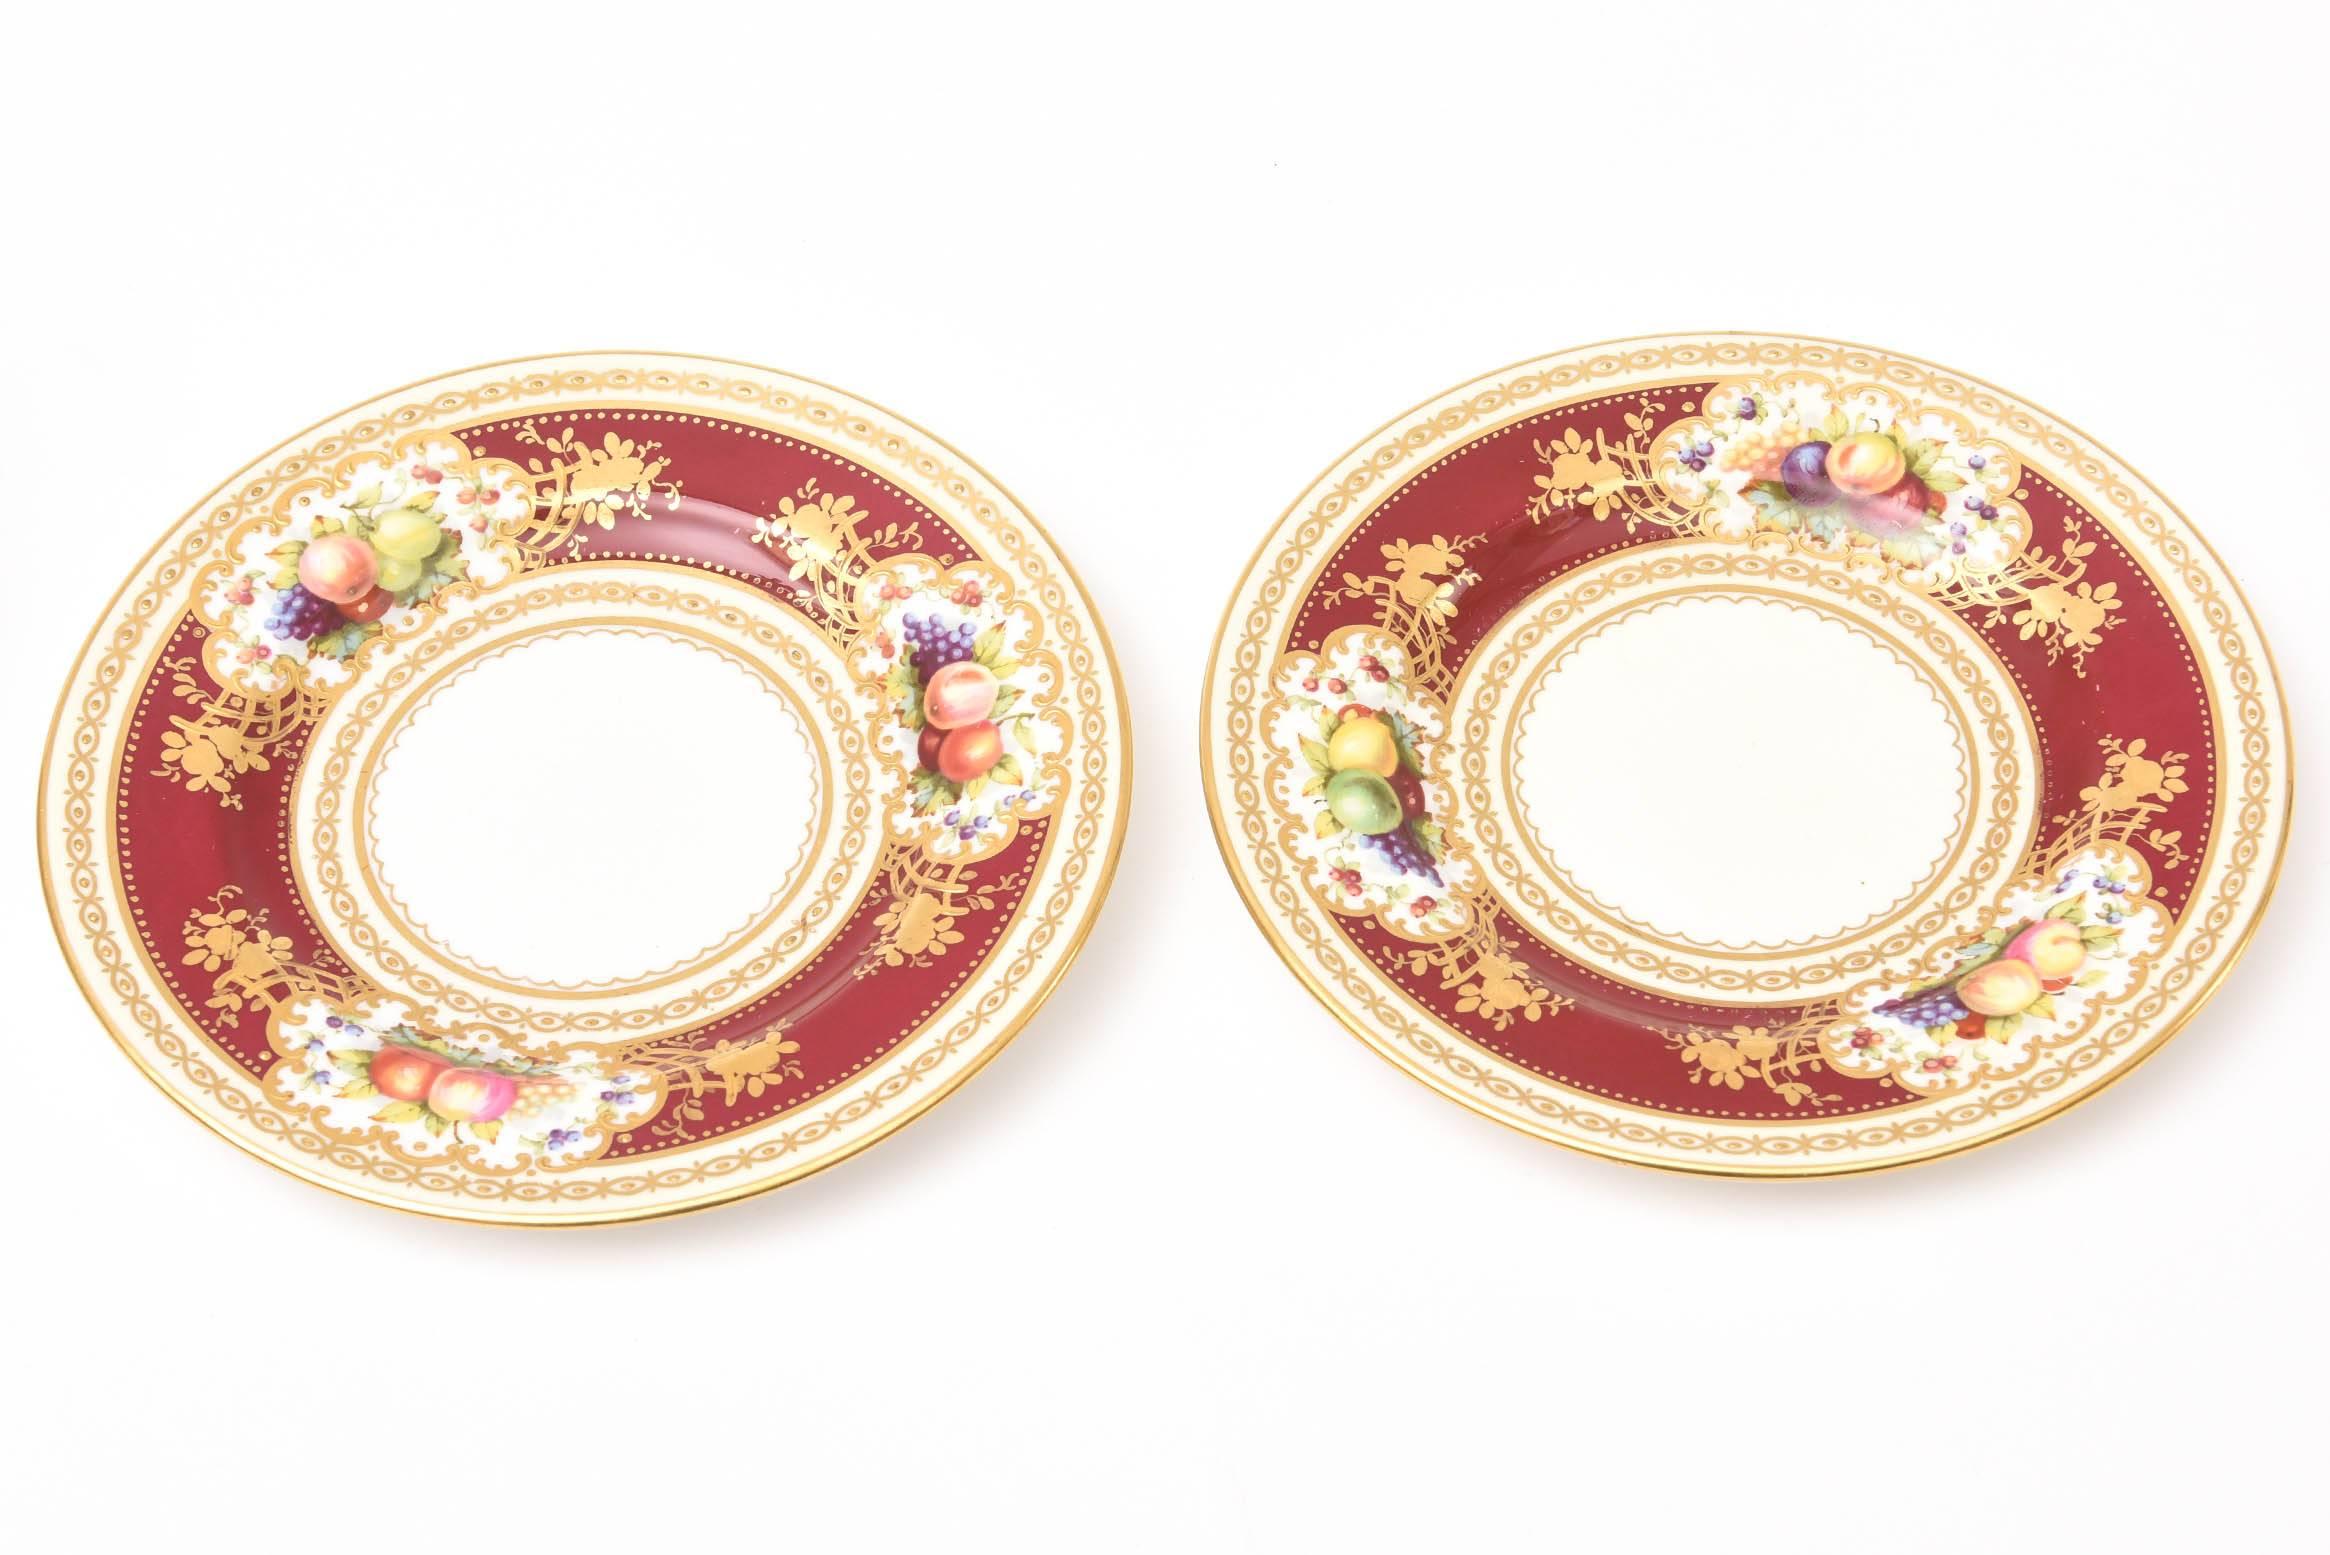 Hand-Crafted Set of 12 Antique Ruby Hand-Painted Bread or Side Plates Featuring Fruit Florals